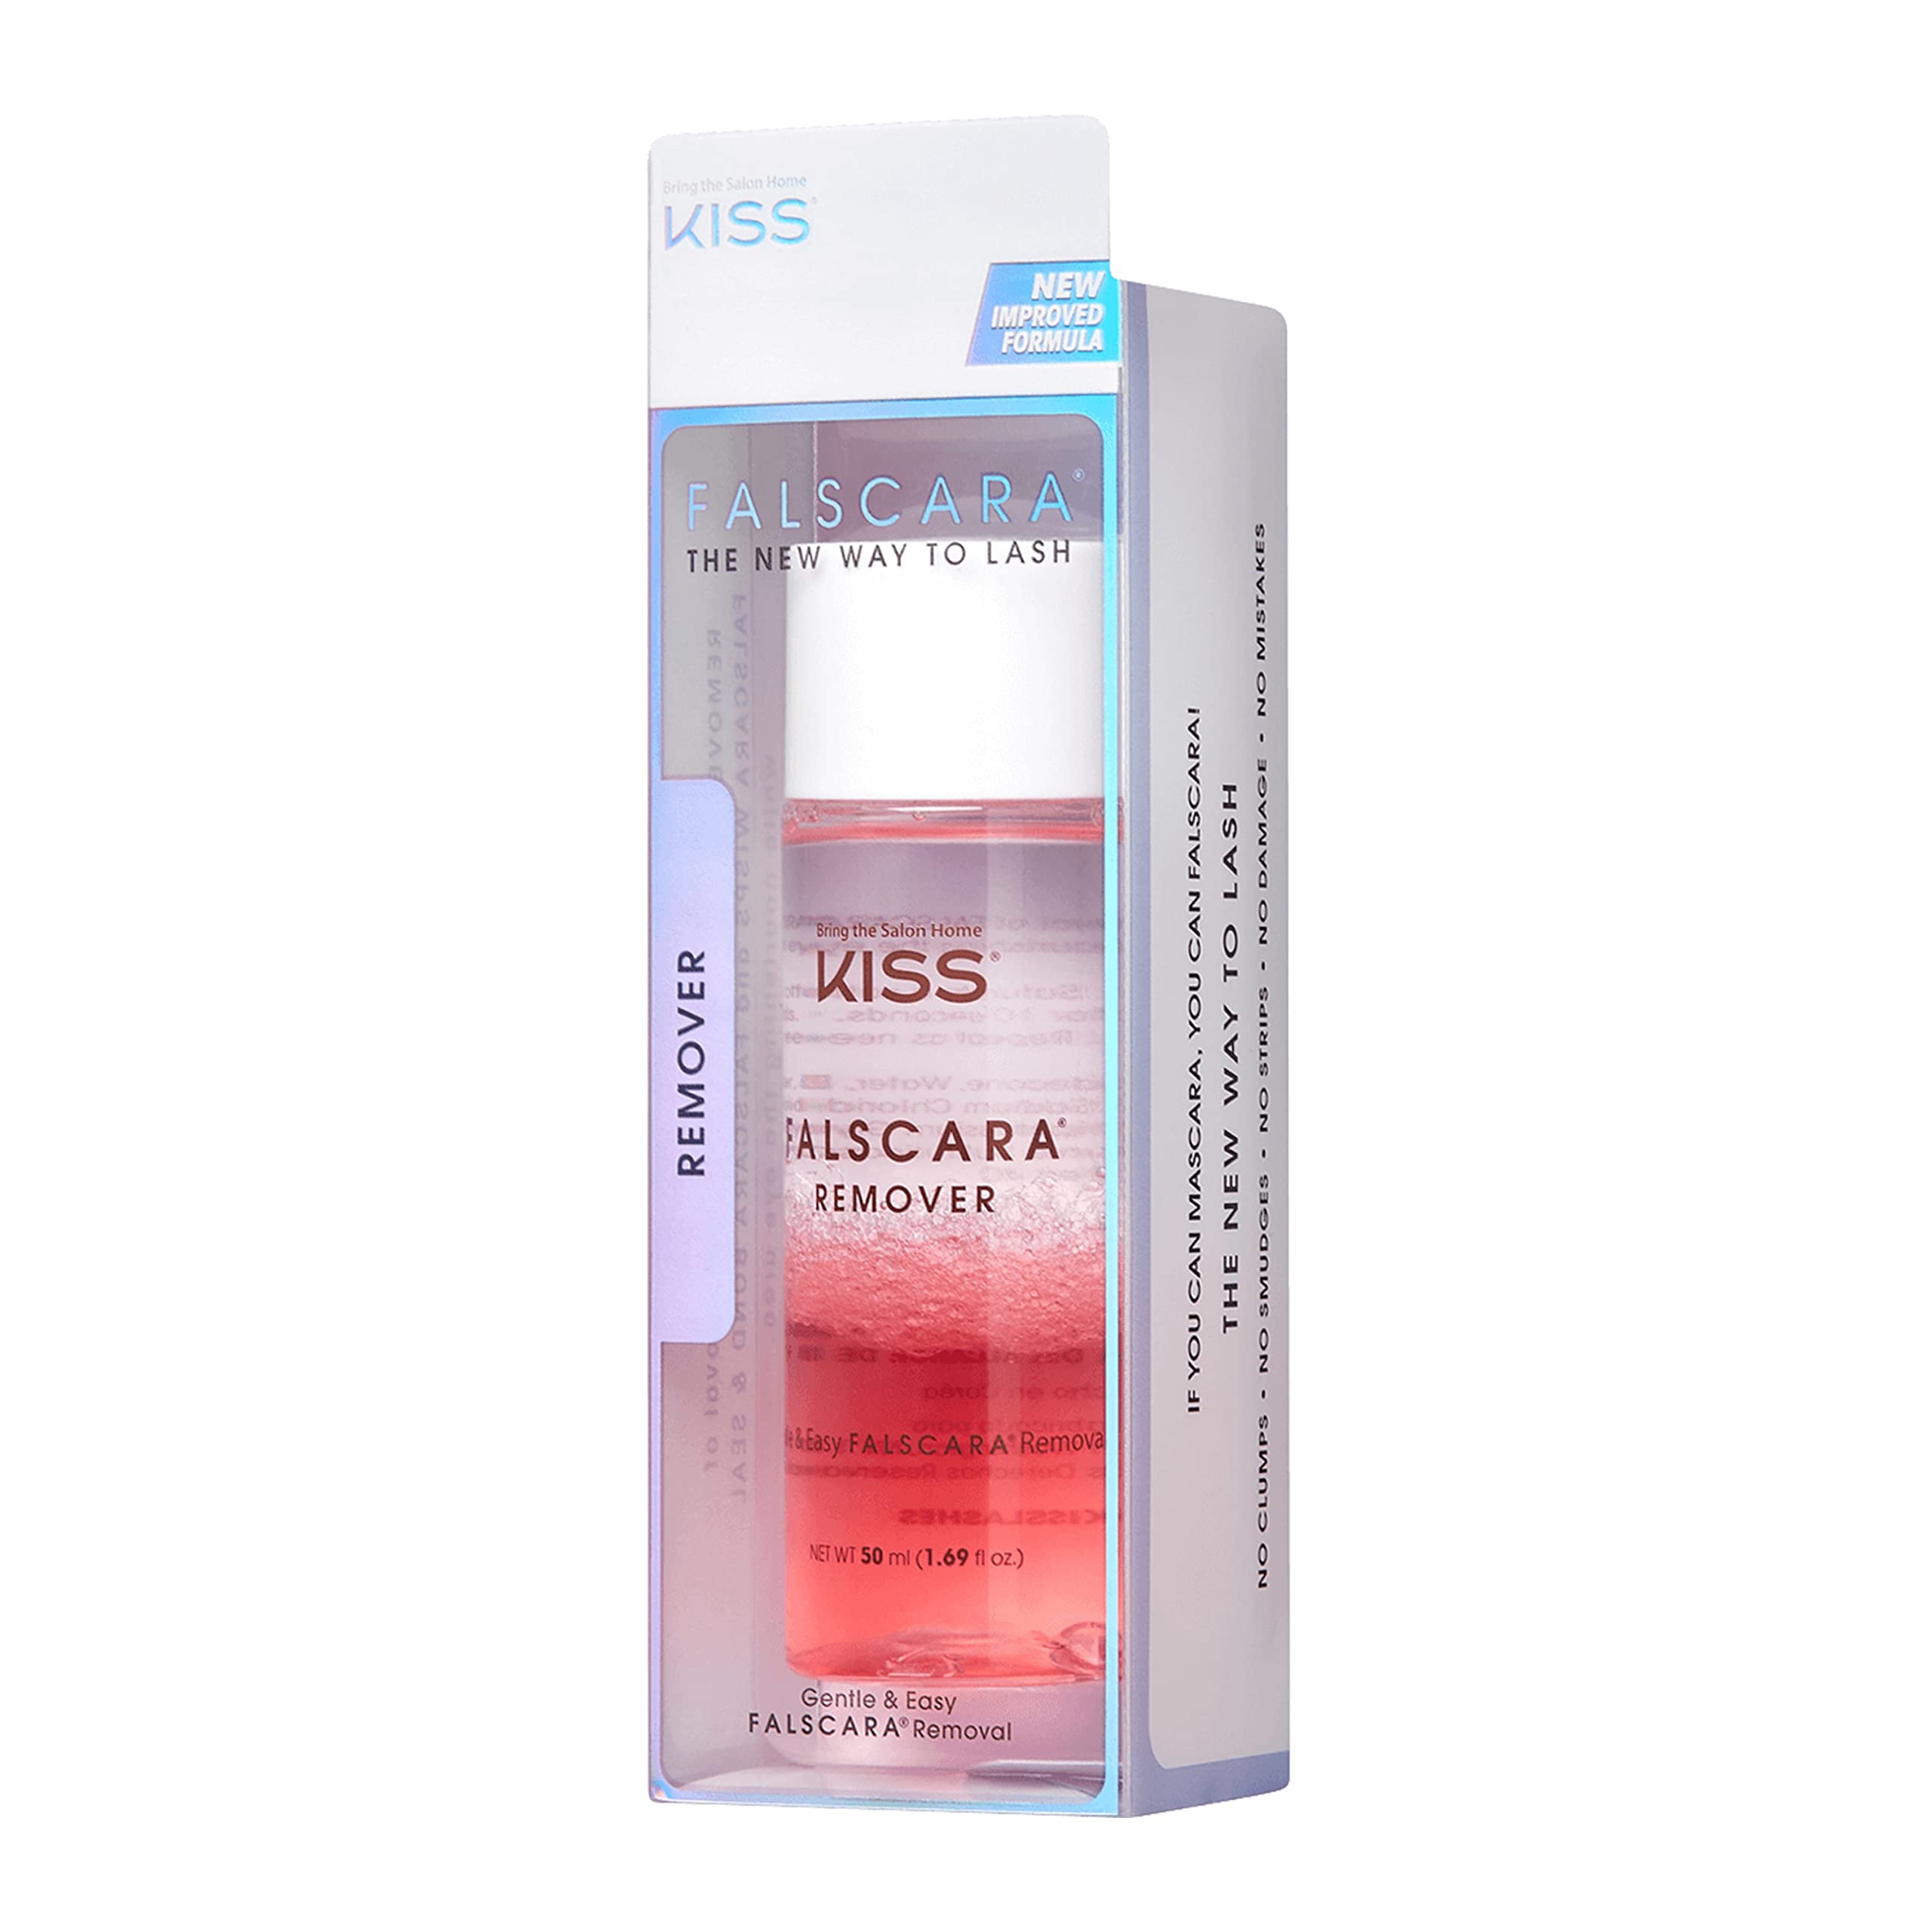 KISS Falscara DIY Eyelash Extension Remover with Natural Rosewater – Gentle Soothing Nourishing Eye Cleanser for Removal of Artificial False Synthetic Eyelashes, Lash Wisps, and Bond & Seal Adhesive